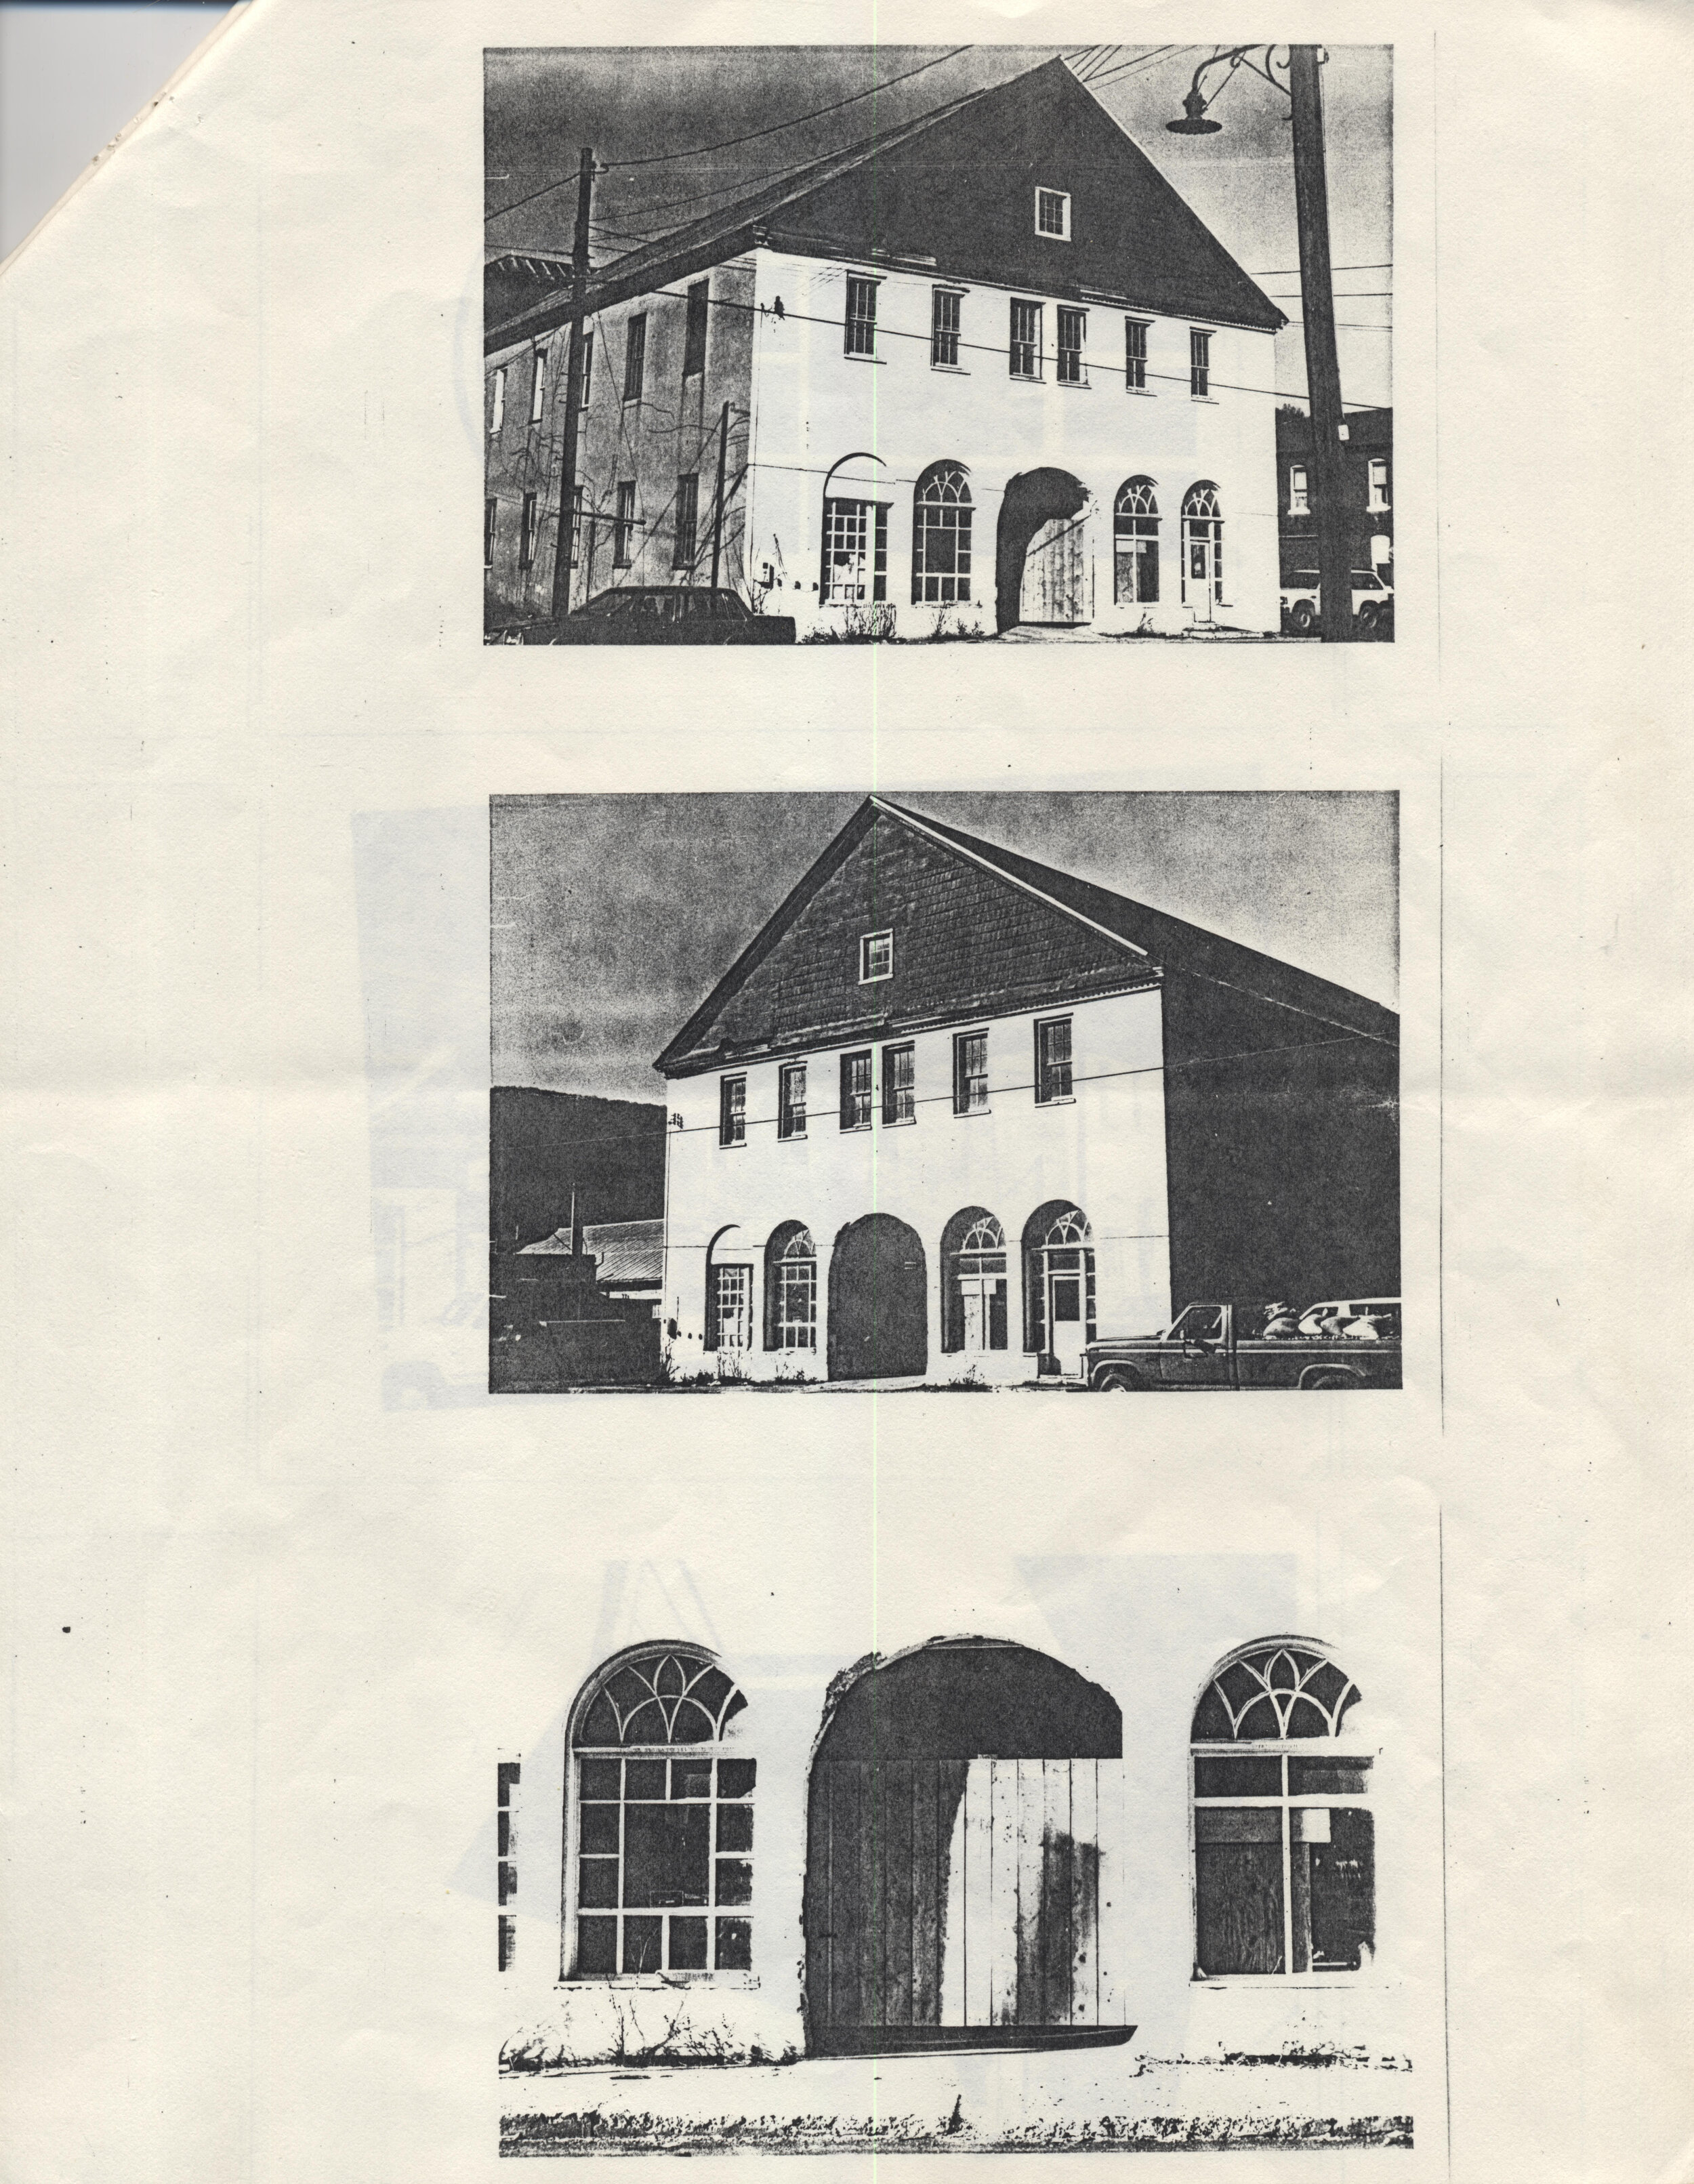 Marlinton Opera House Inspection Report Page 5.jpg